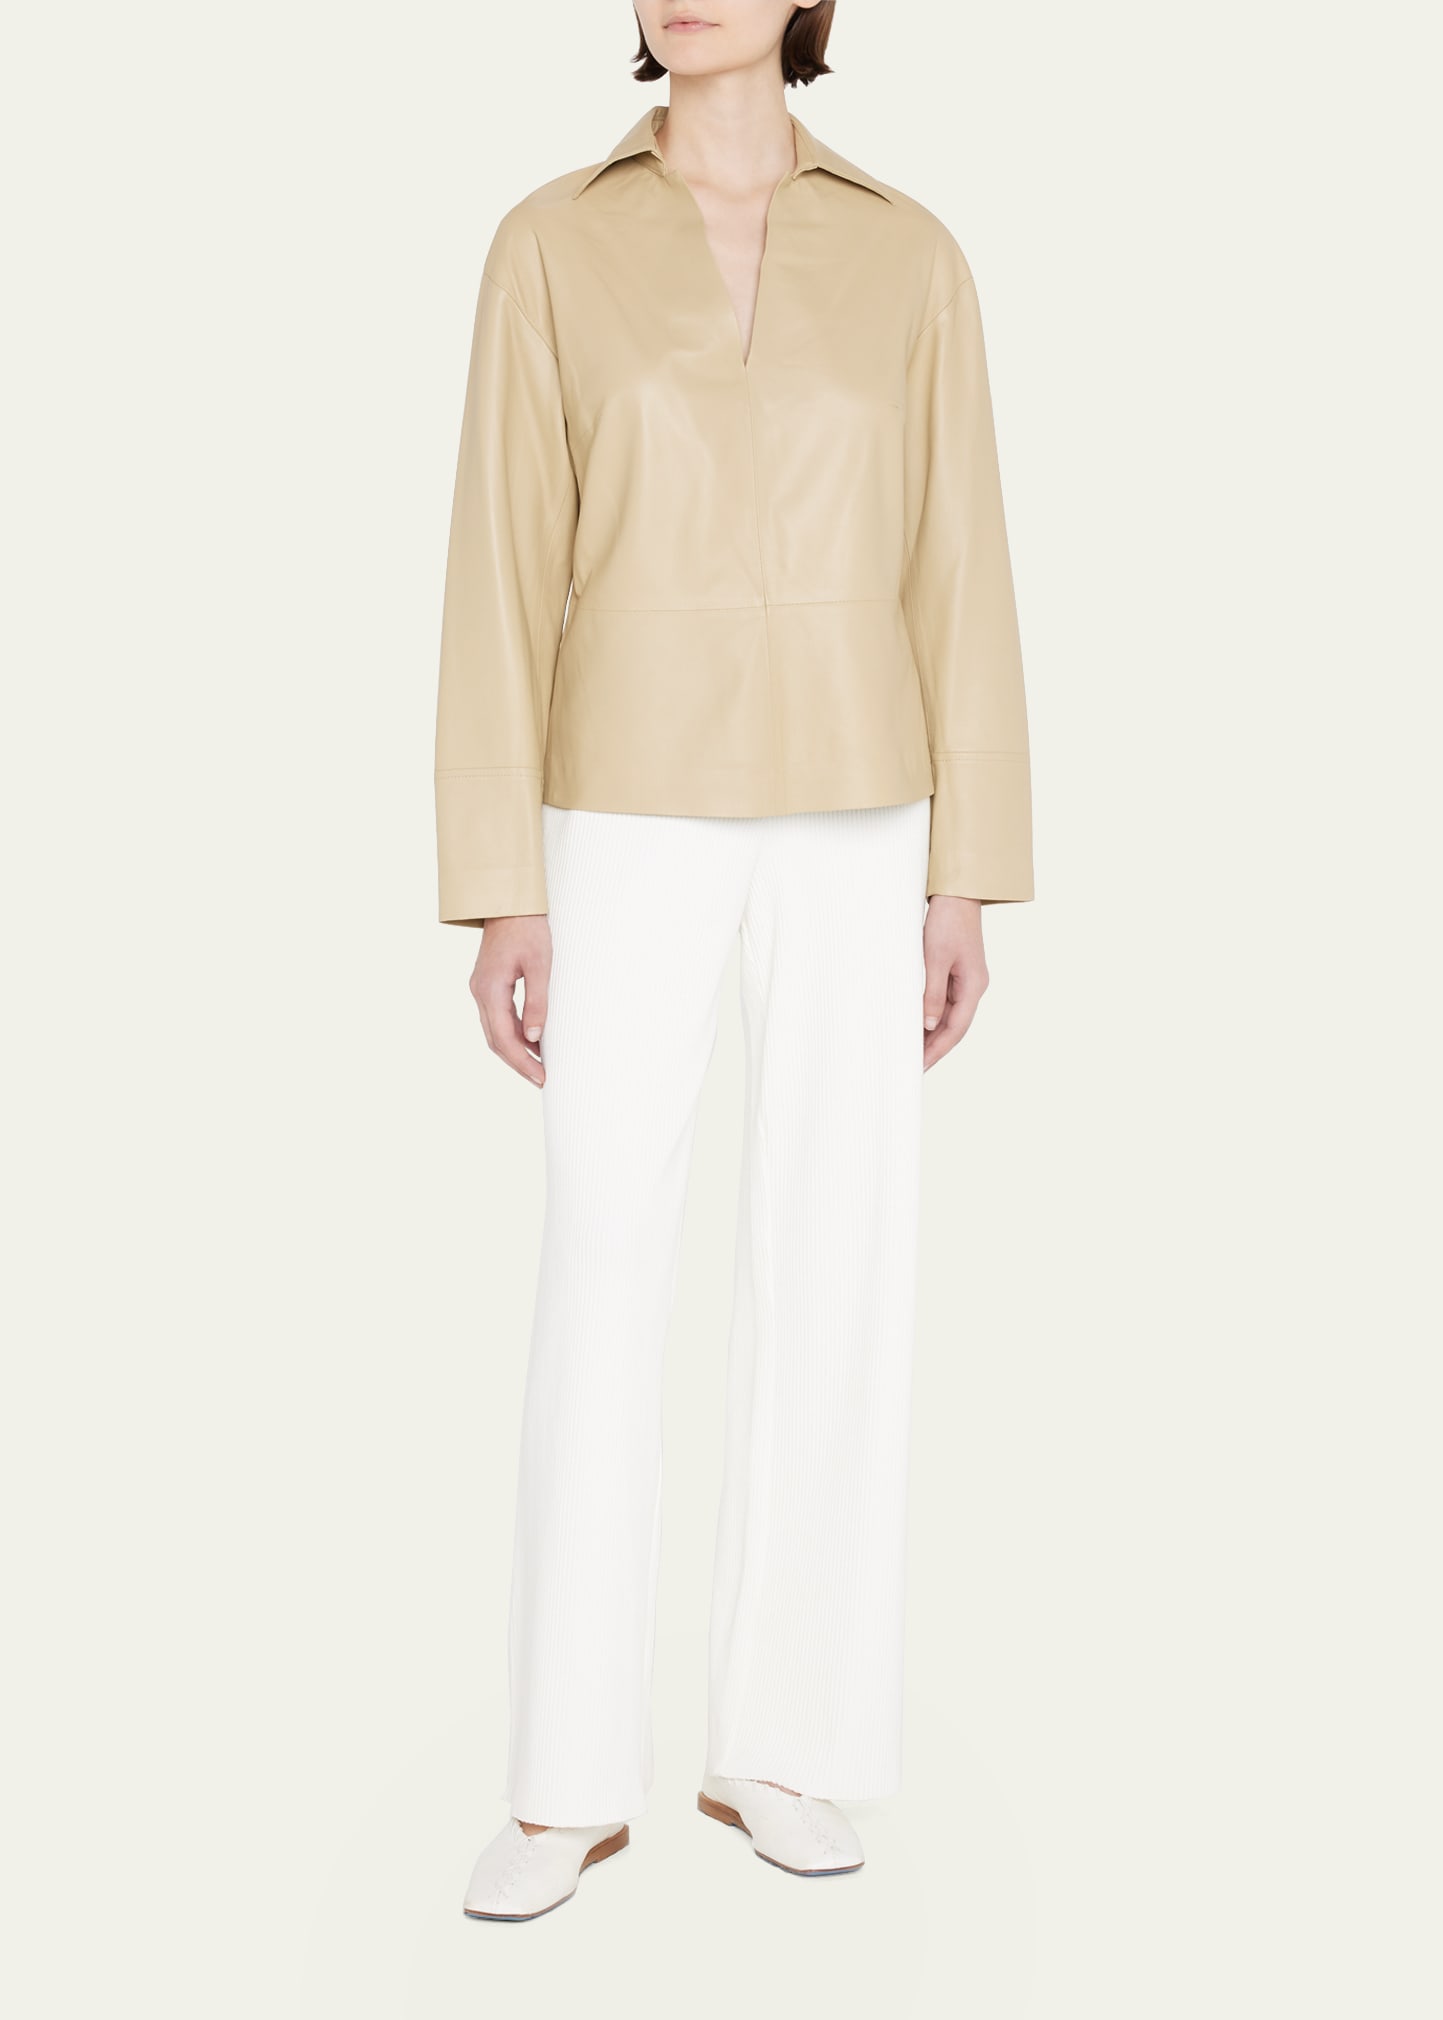 Vince Paneled Leather Popover Top